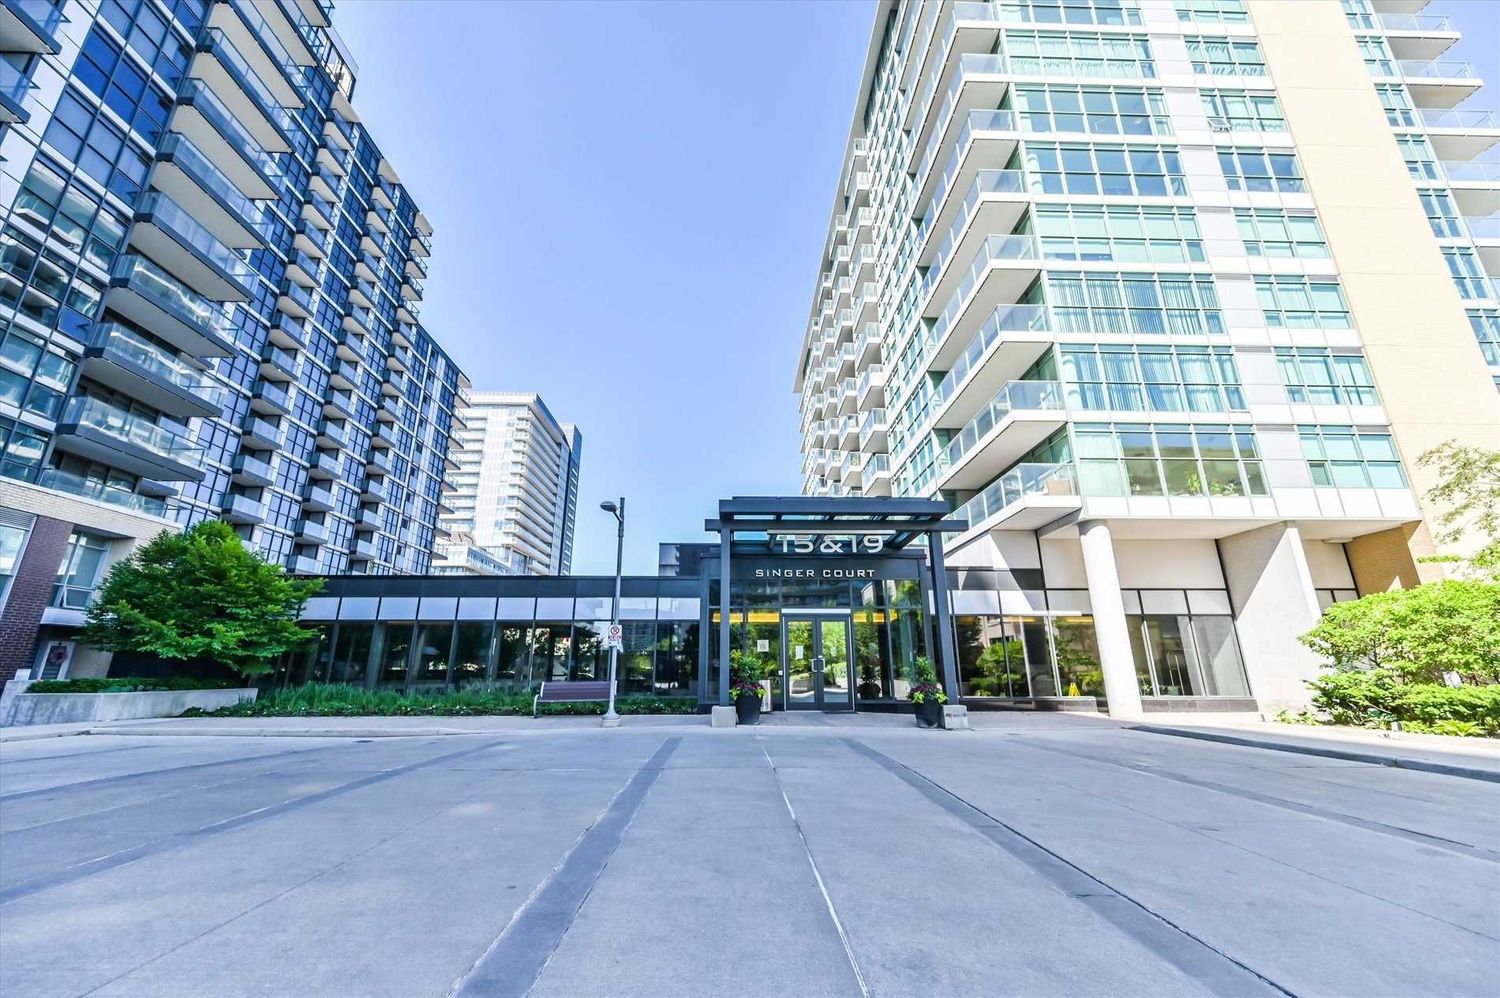 15-33 Singer Court. Discovery I & Discovery II Condos is located in  North York, Toronto - image #2 of 3